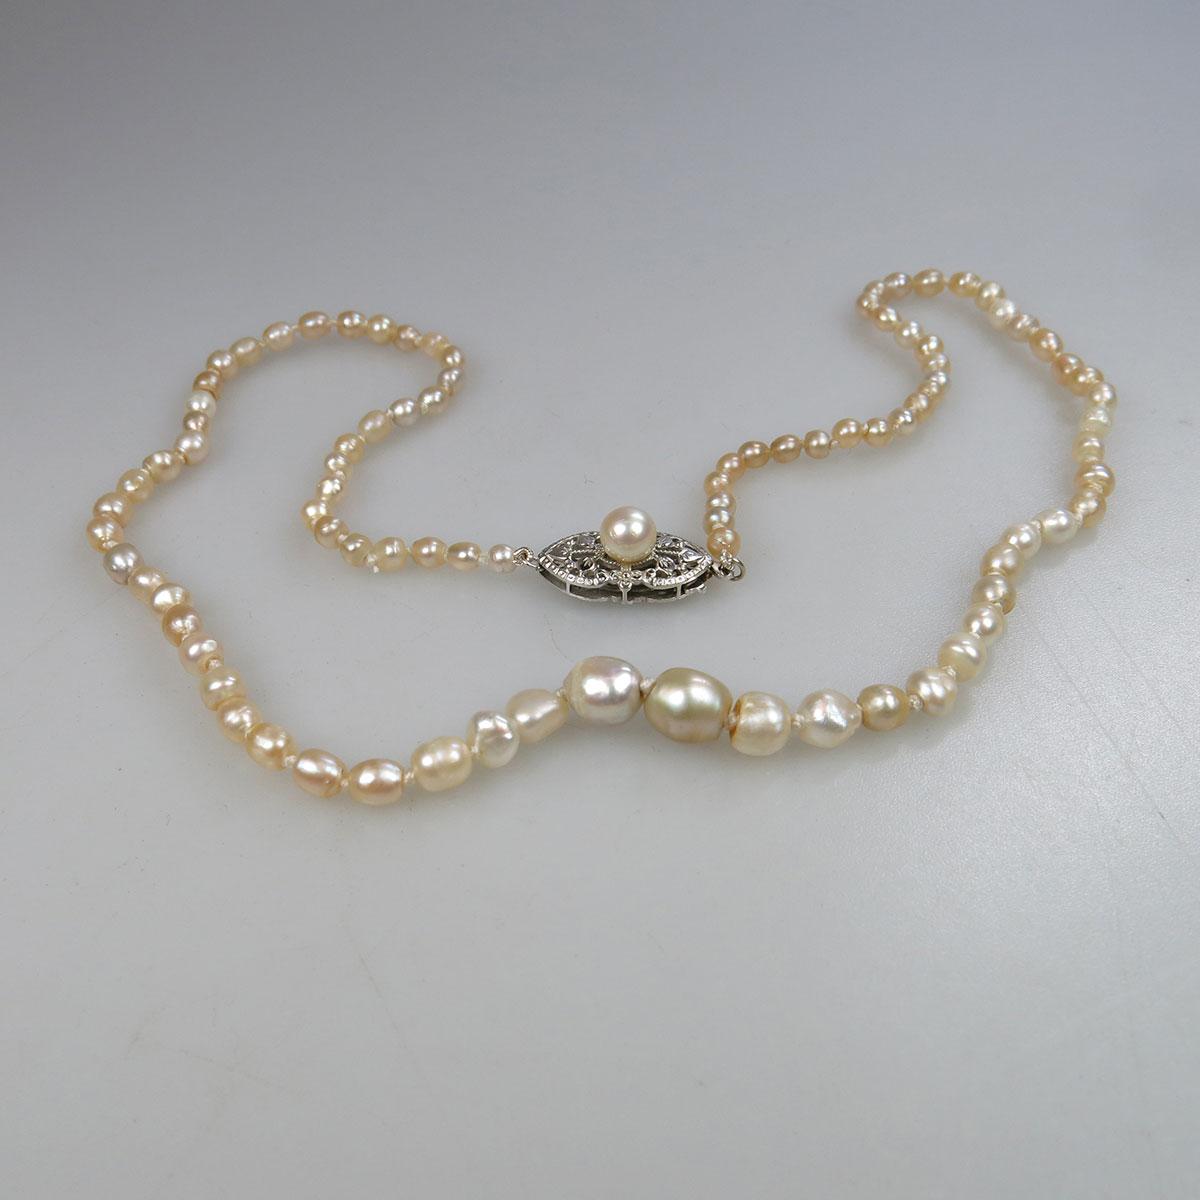 Single Graduated Stand Of Natural Pearls